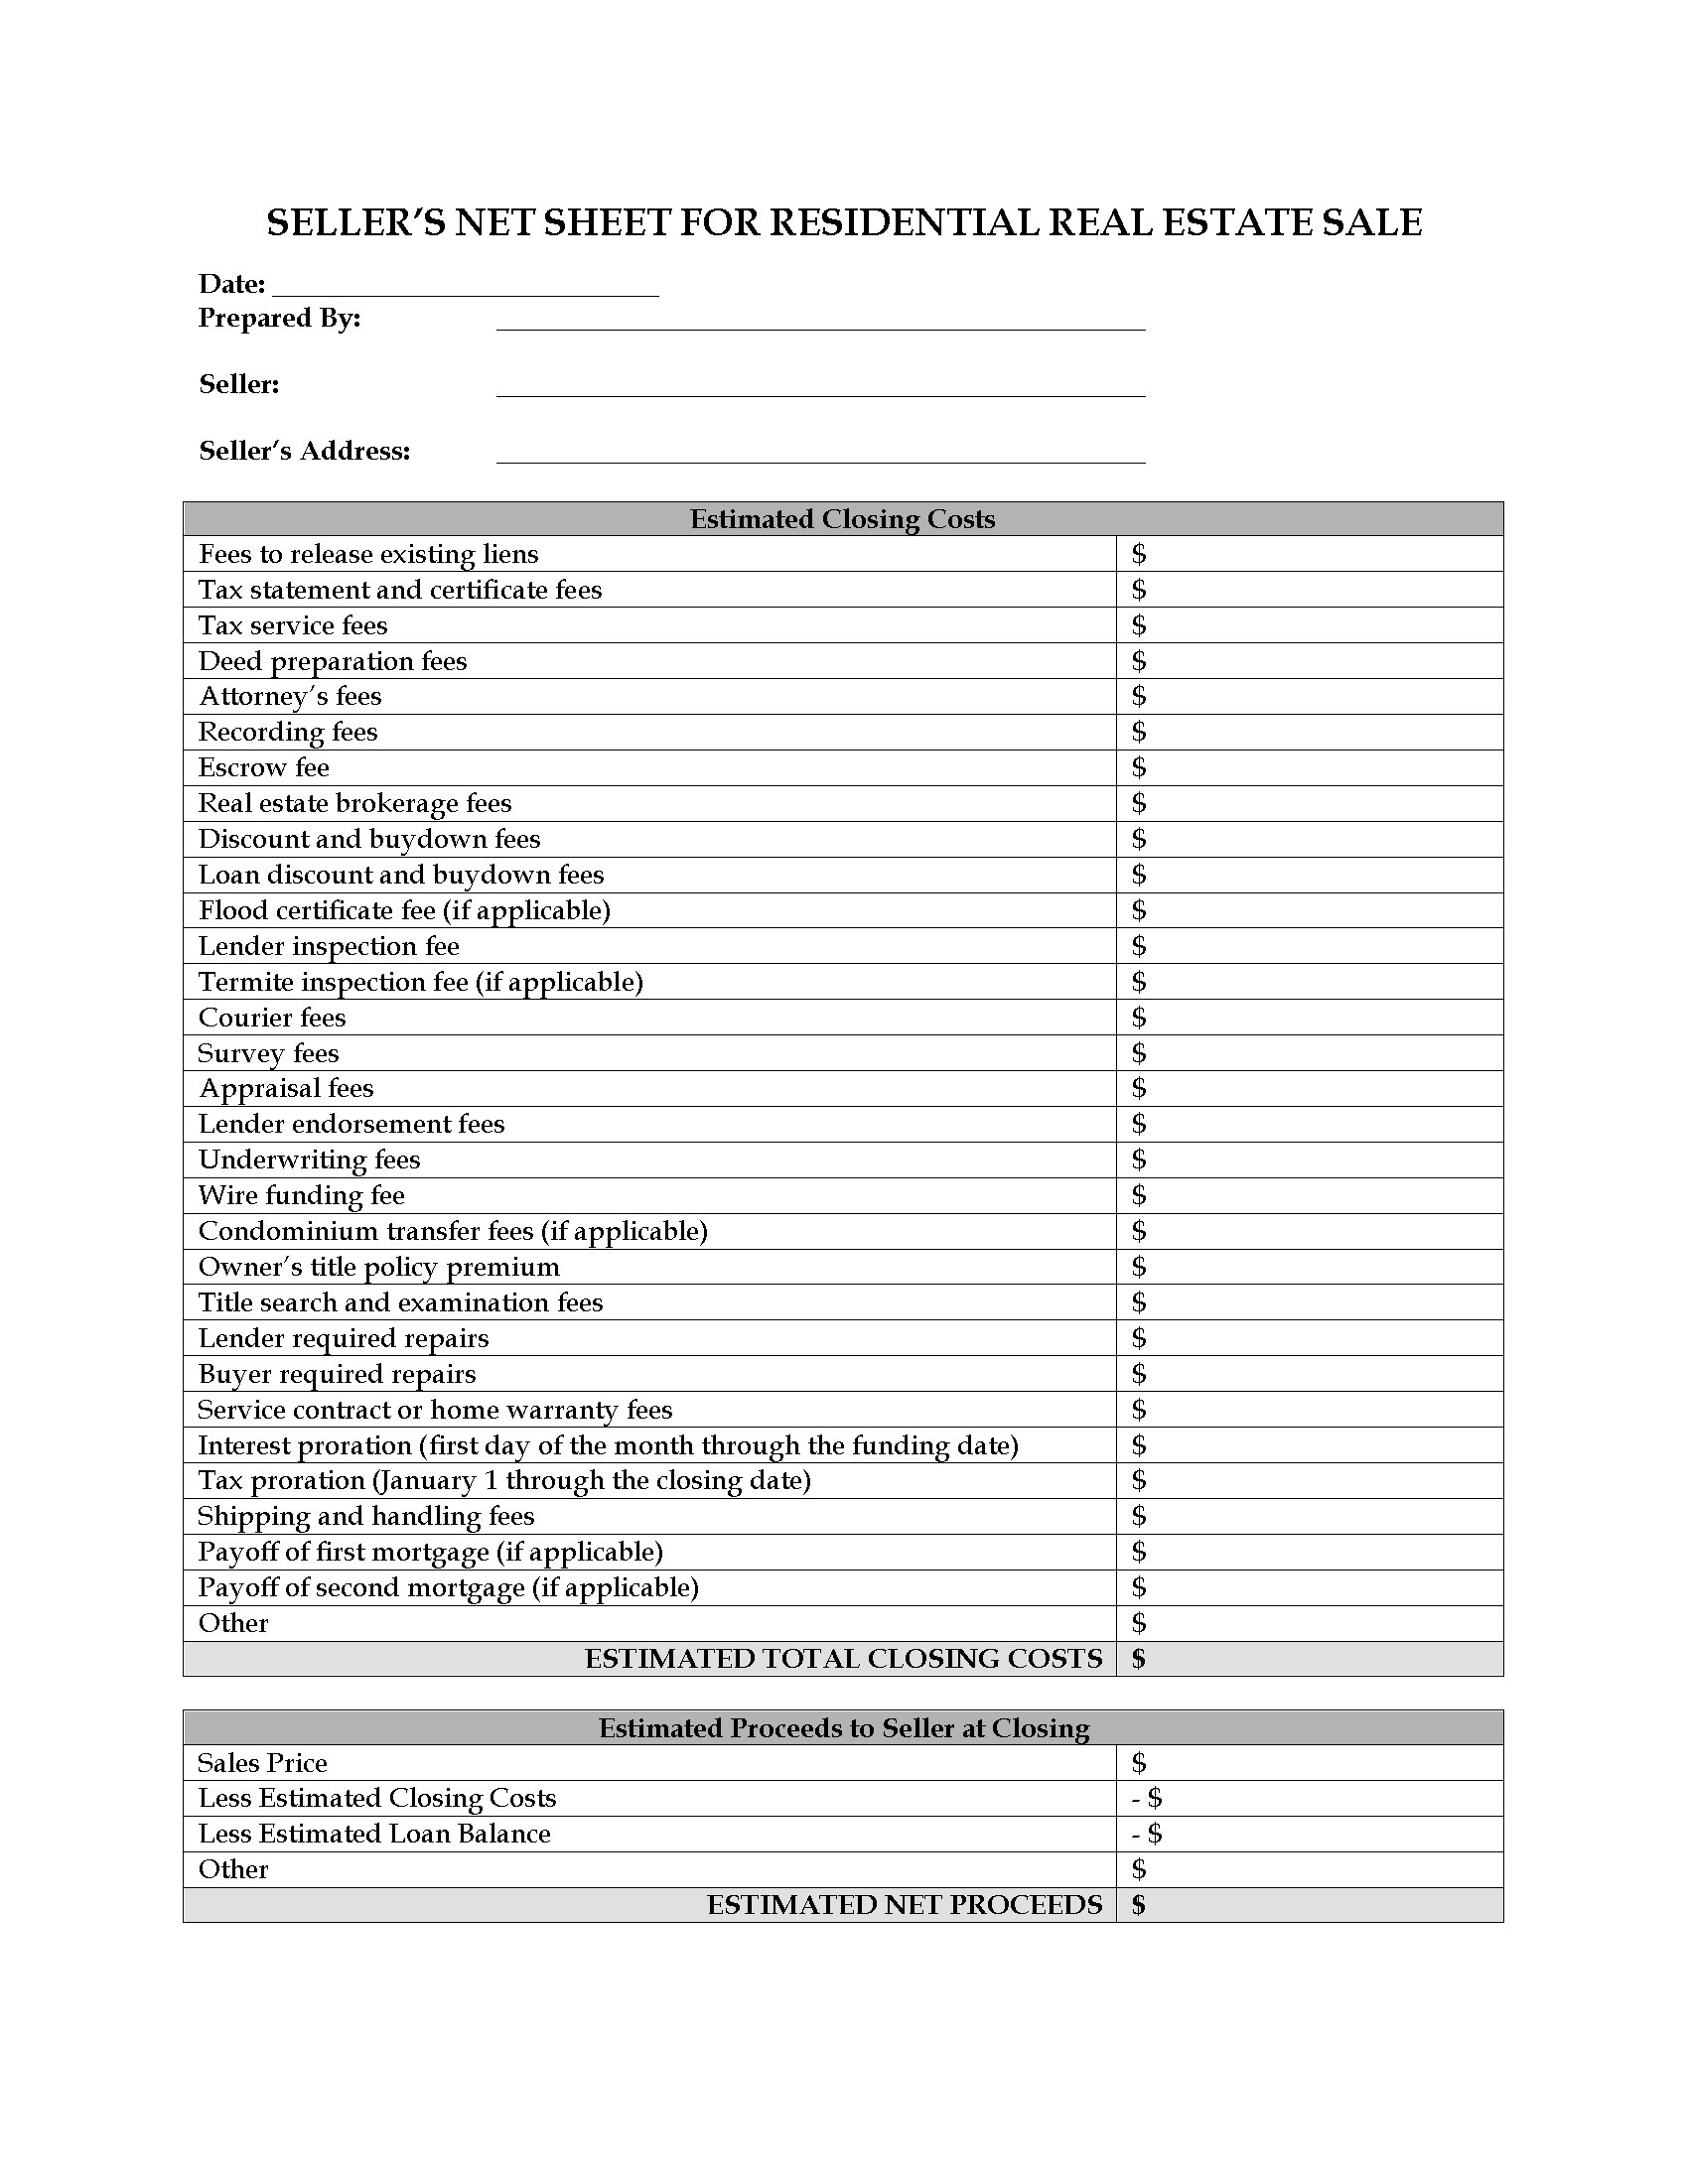 USA Seller s Net Sheet For Real Estate Sale Legal Forms And Business Templates MegaDox